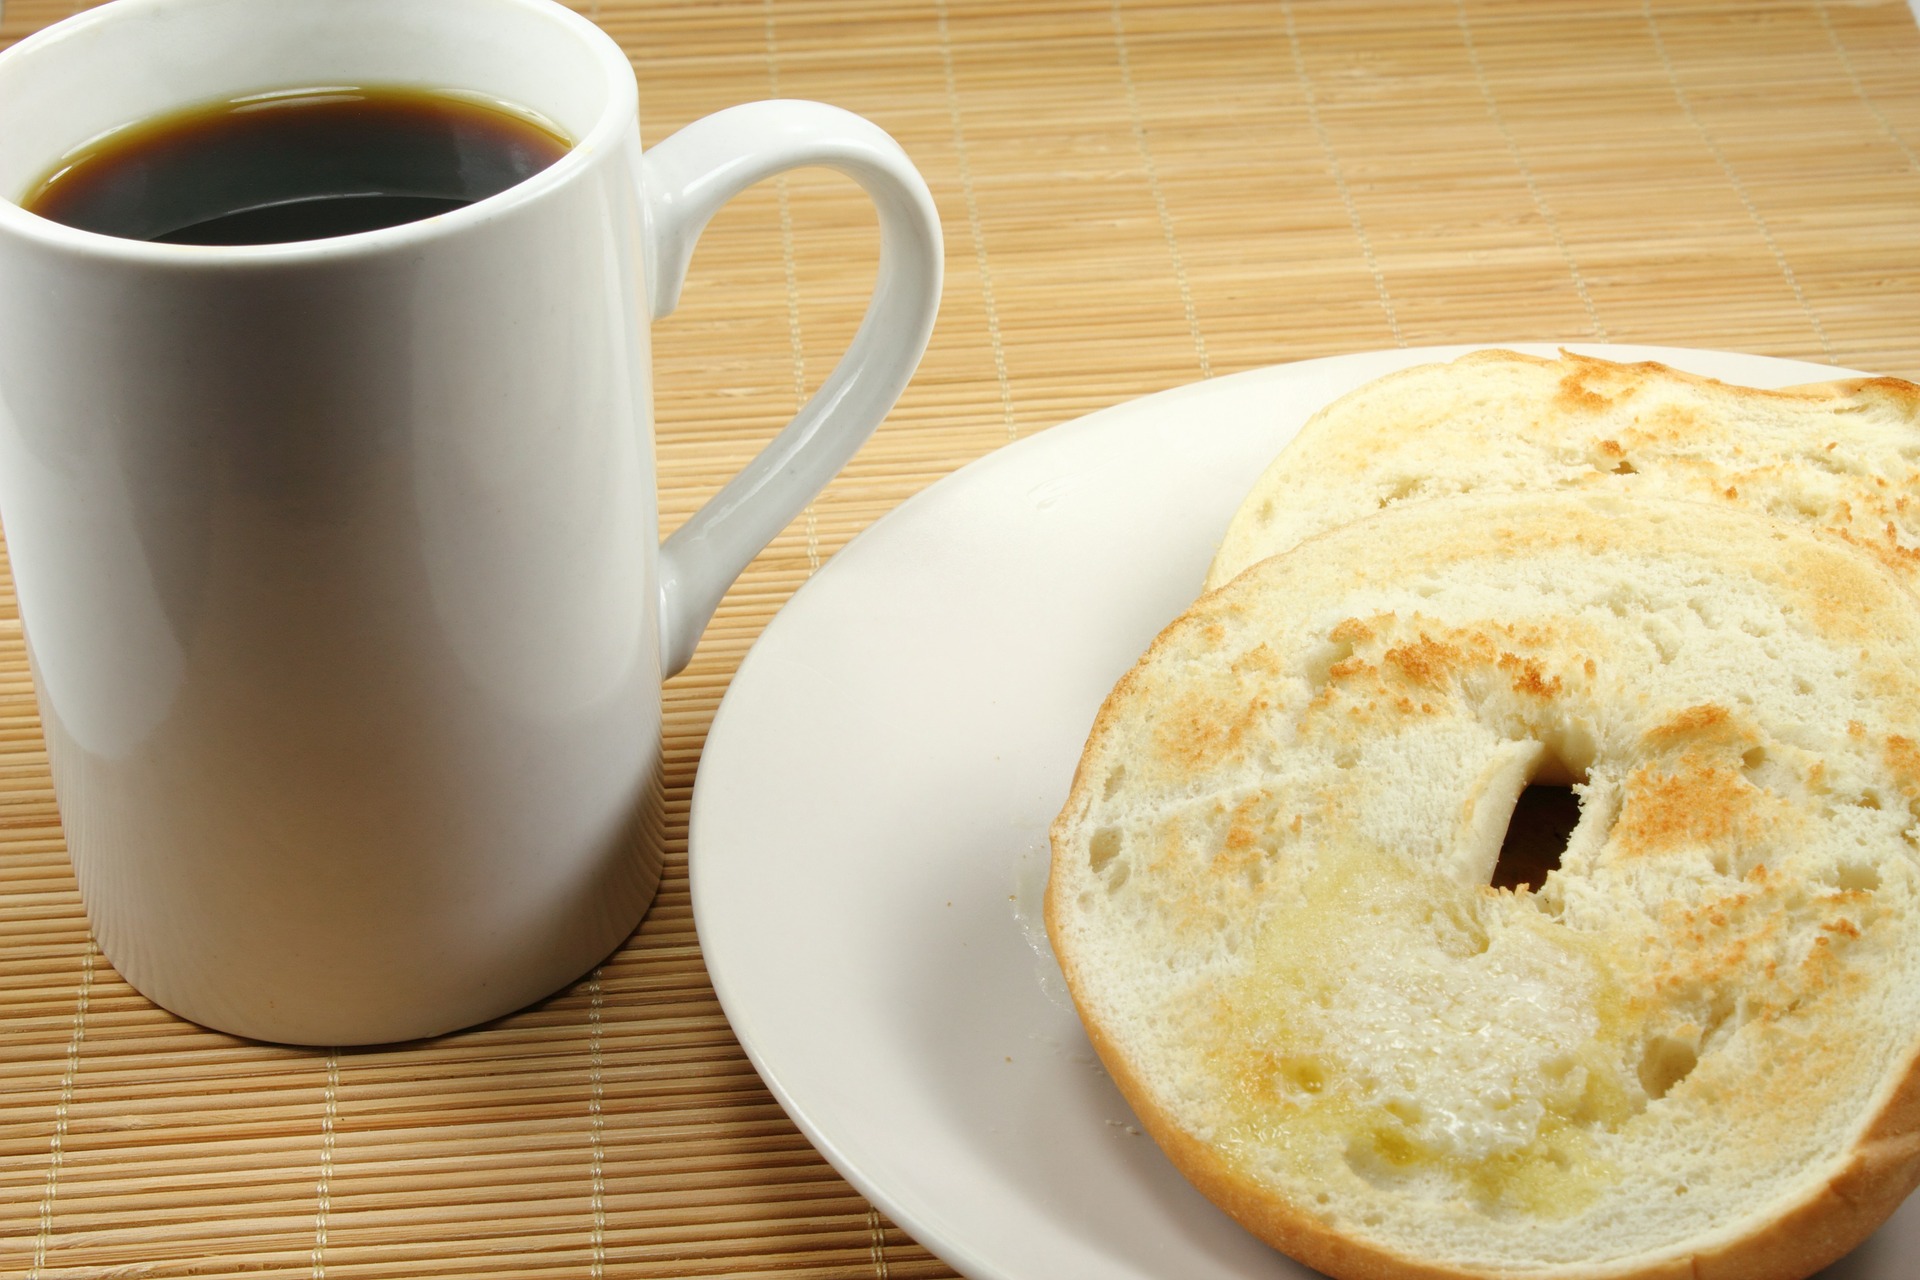 a mug with coffee and a toasted bagel on a plate